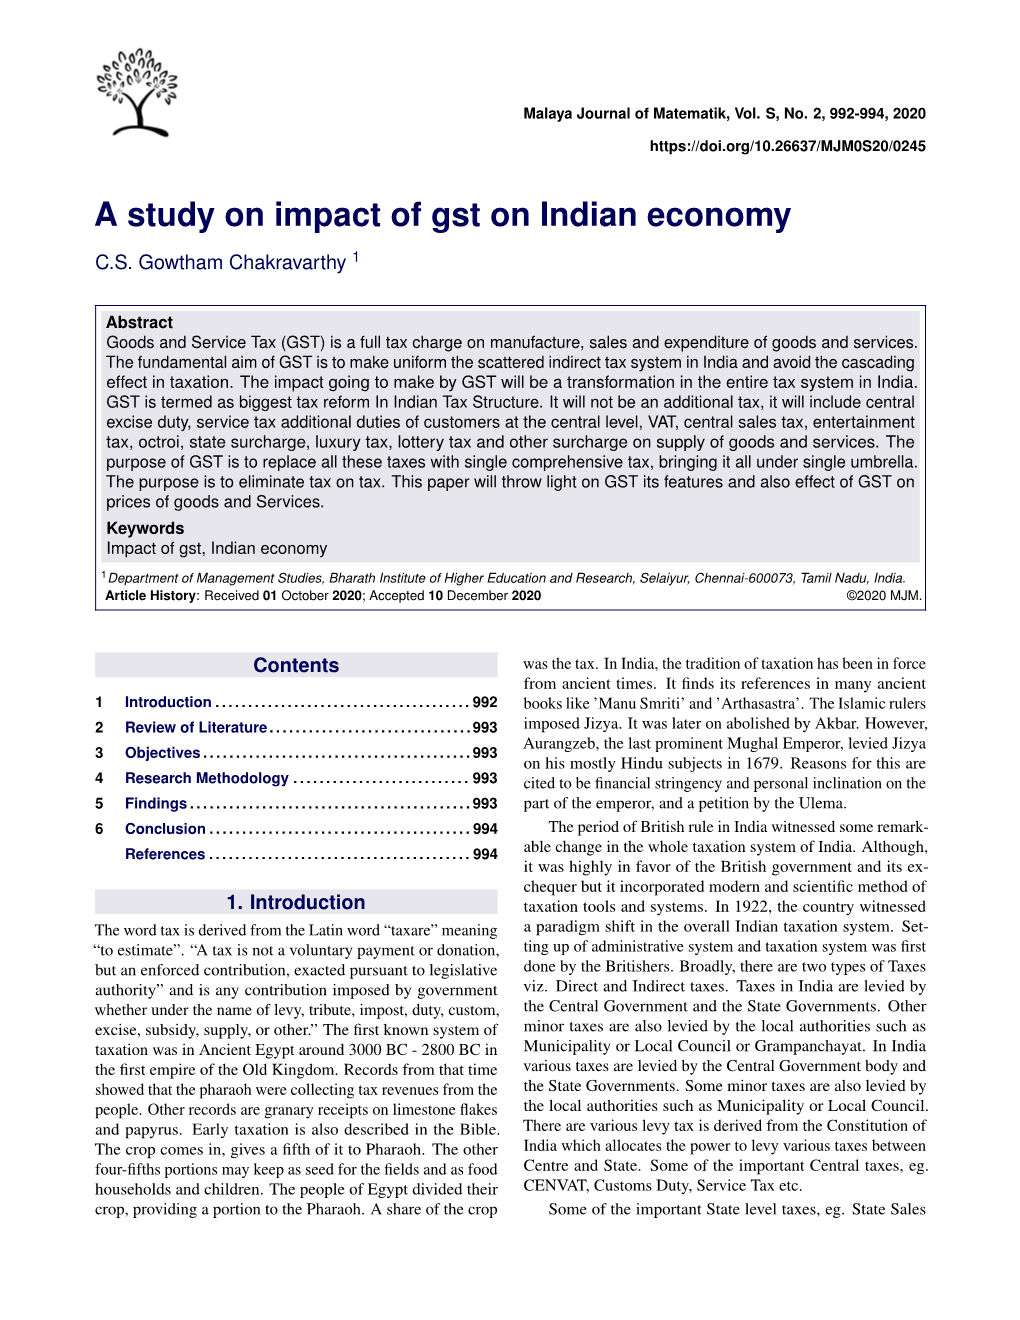 A Study on Impact of Gst on Indian Economy